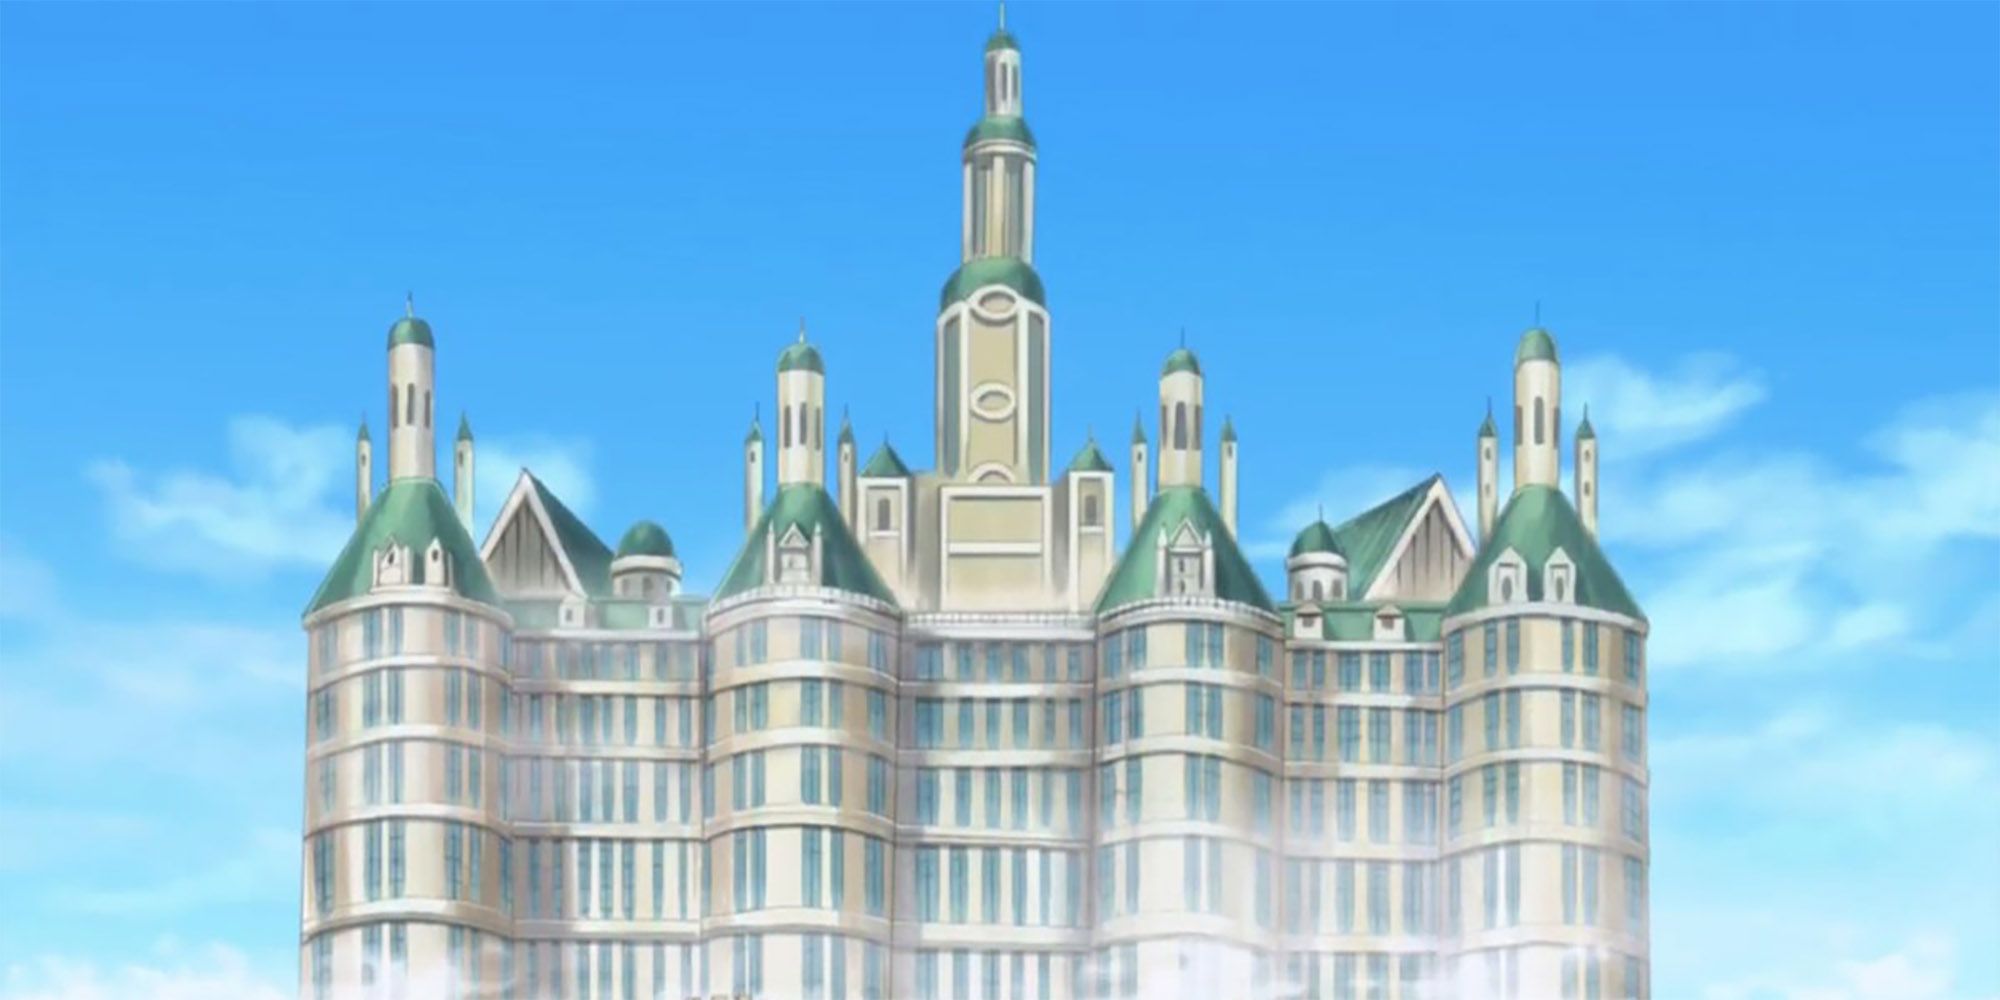 One Piece - What Pangaea Castle Looks Like In The Anime